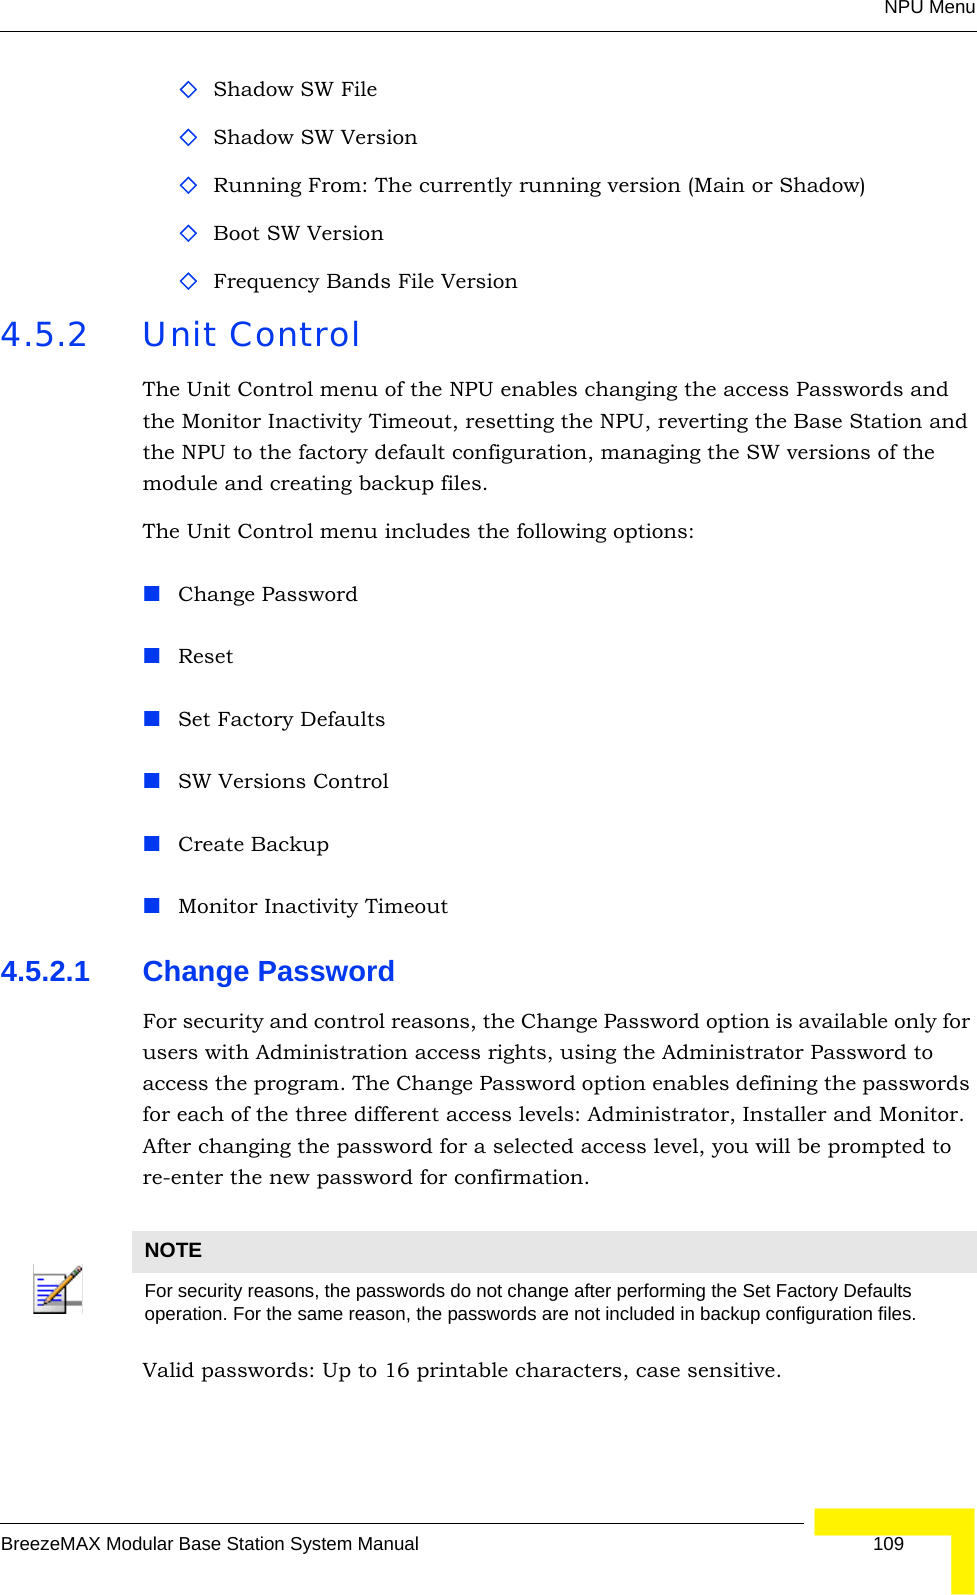 NPU MenuBreezeMAX Modular Base Station System Manual 109Shadow SW FileShadow SW Version Running From: The currently running version (Main or Shadow)Boot SW VersionFrequency Bands File Version4.5.2 Unit ControlThe Unit Control menu of the NPU enables changing the access Passwords and the Monitor Inactivity Timeout, resetting the NPU, reverting the Base Station and the NPU to the factory default configuration, managing the SW versions of the module and creating backup files.The Unit Control menu includes the following options:Change PasswordResetSet Factory DefaultsSW Versions ControlCreate BackupMonitor Inactivity Timeout4.5.2.1 Change PasswordFor security and control reasons, the Change Password option is available only for users with Administration access rights, using the Administrator Password to access the program. The Change Password option enables defining the passwords for each of the three different access levels: Administrator, Installer and Monitor. After changing the password for a selected access level, you will be prompted to re-enter the new password for confirmation.Valid passwords: Up to 16 printable characters, case sensitive.NOTEFor security reasons, the passwords do not change after performing the Set Factory Defaults operation. For the same reason, the passwords are not included in backup configuration files.